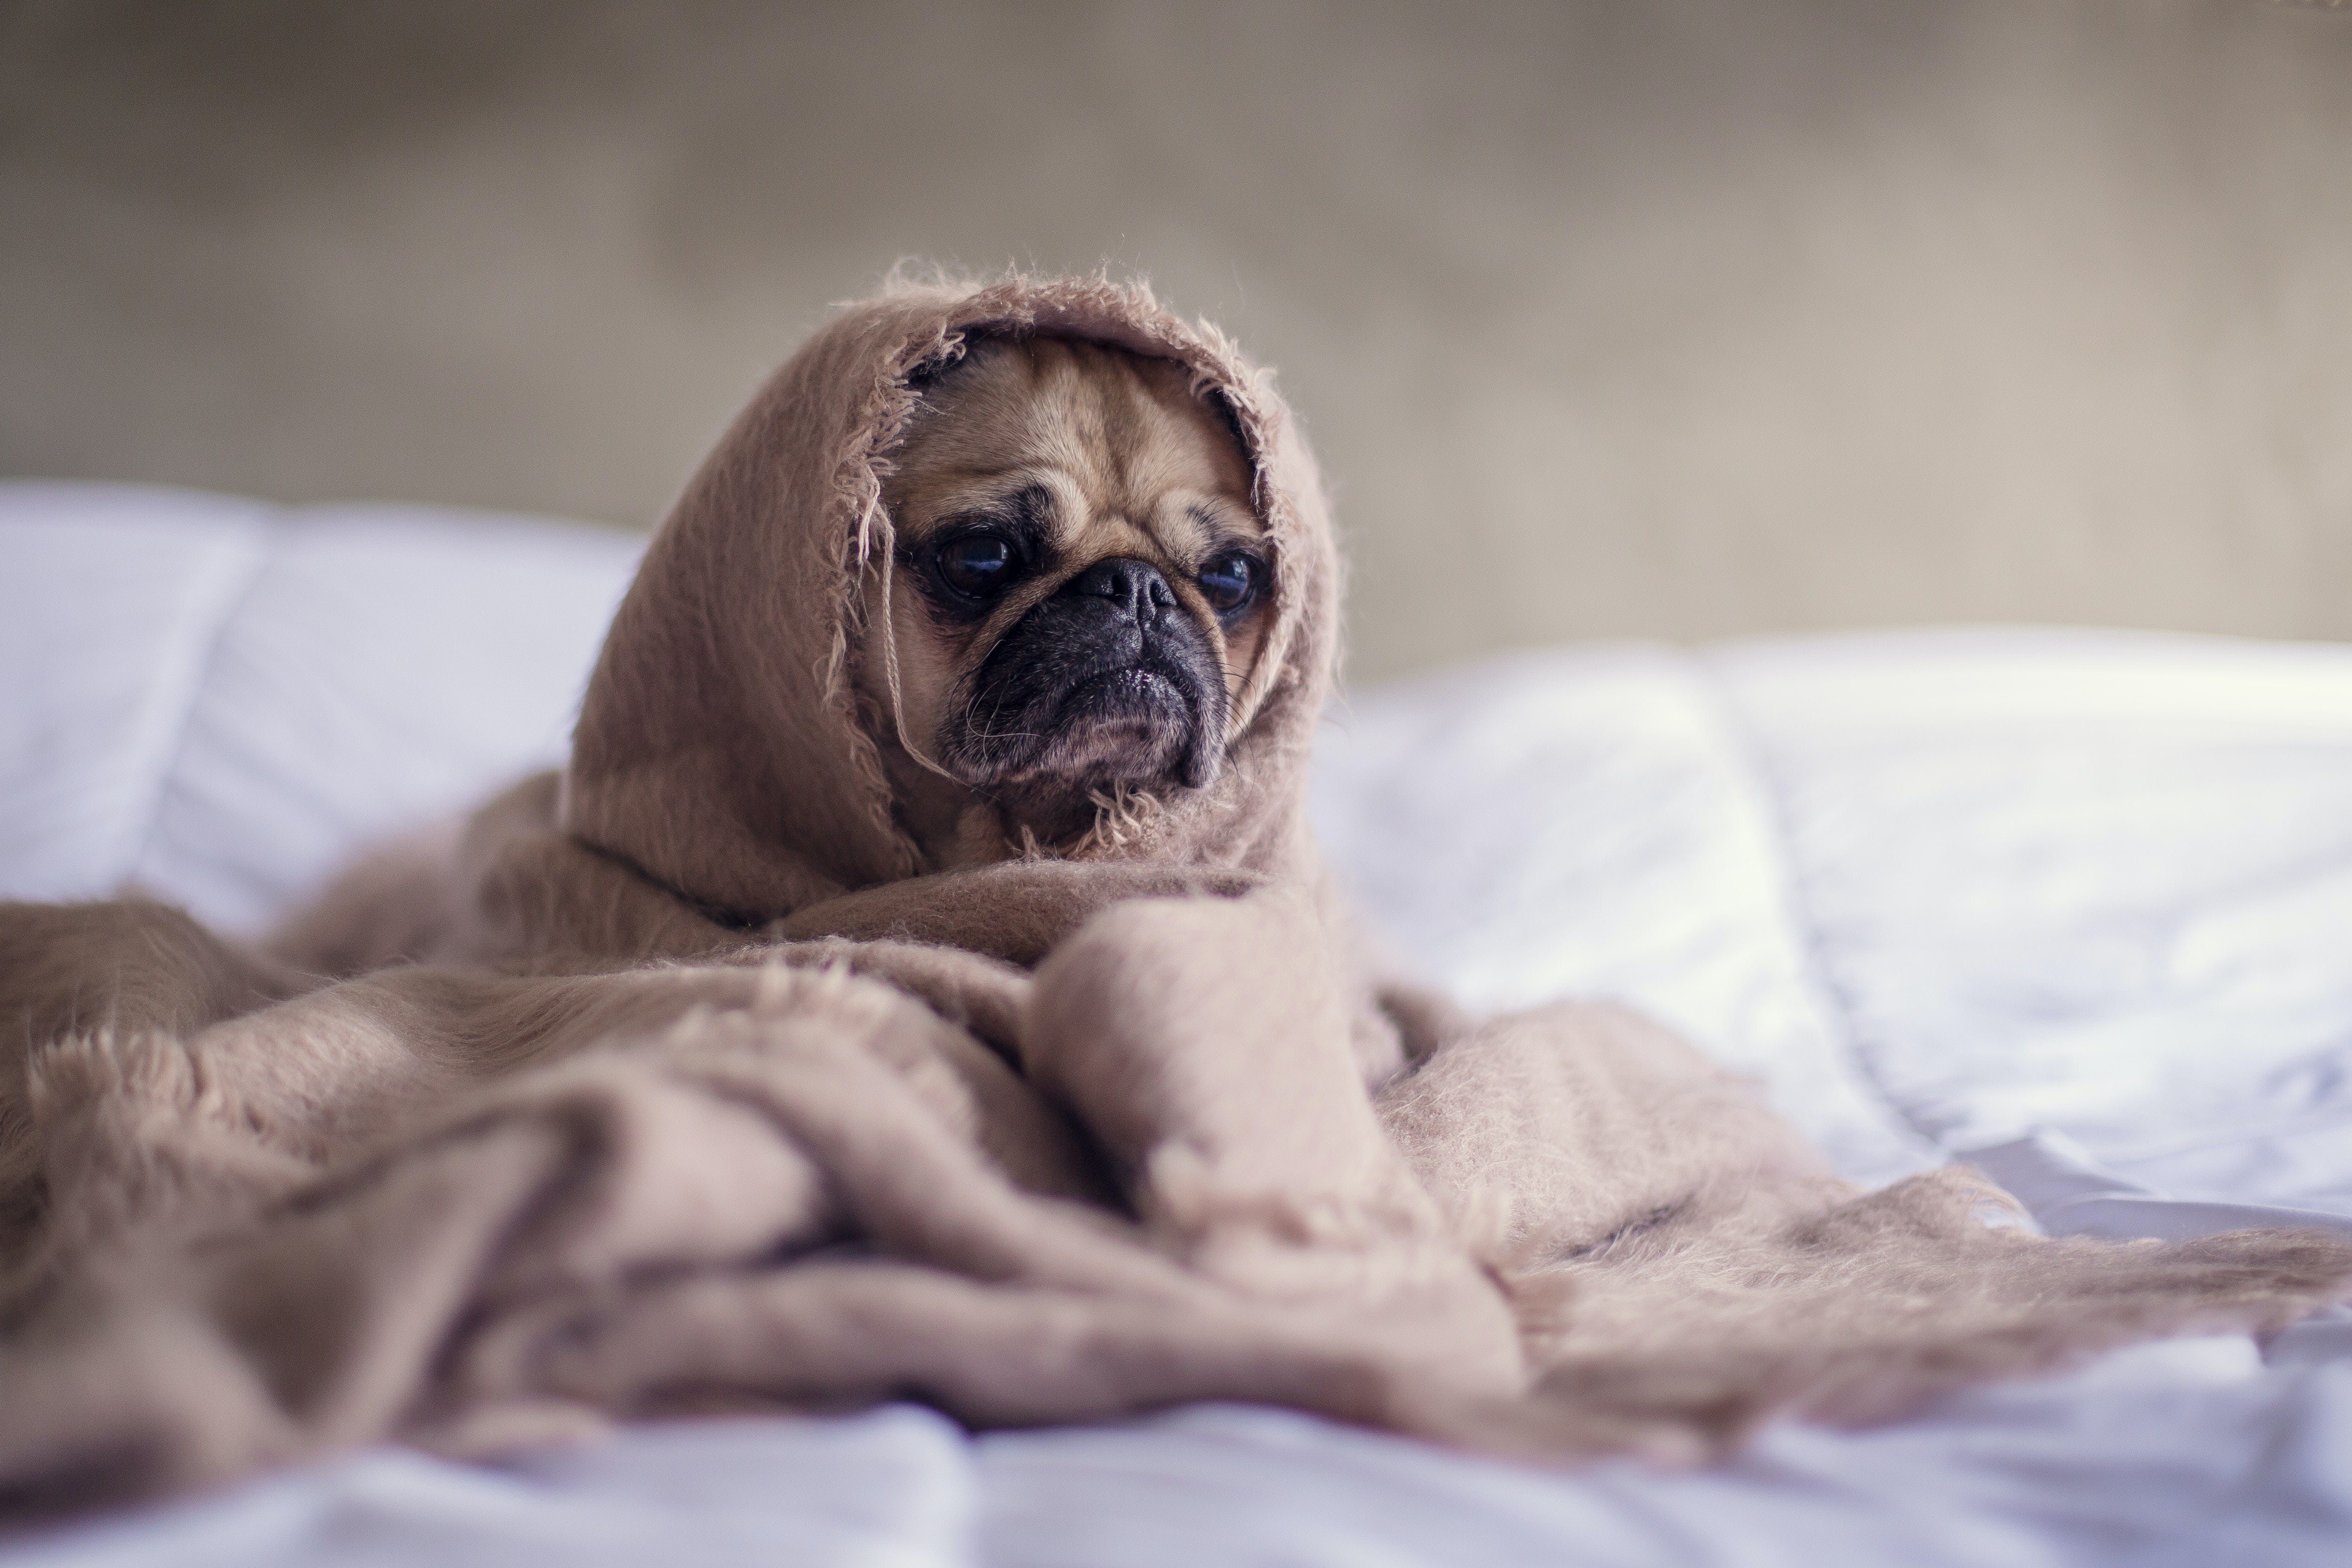 Dog looking sad wrapped in a blanket